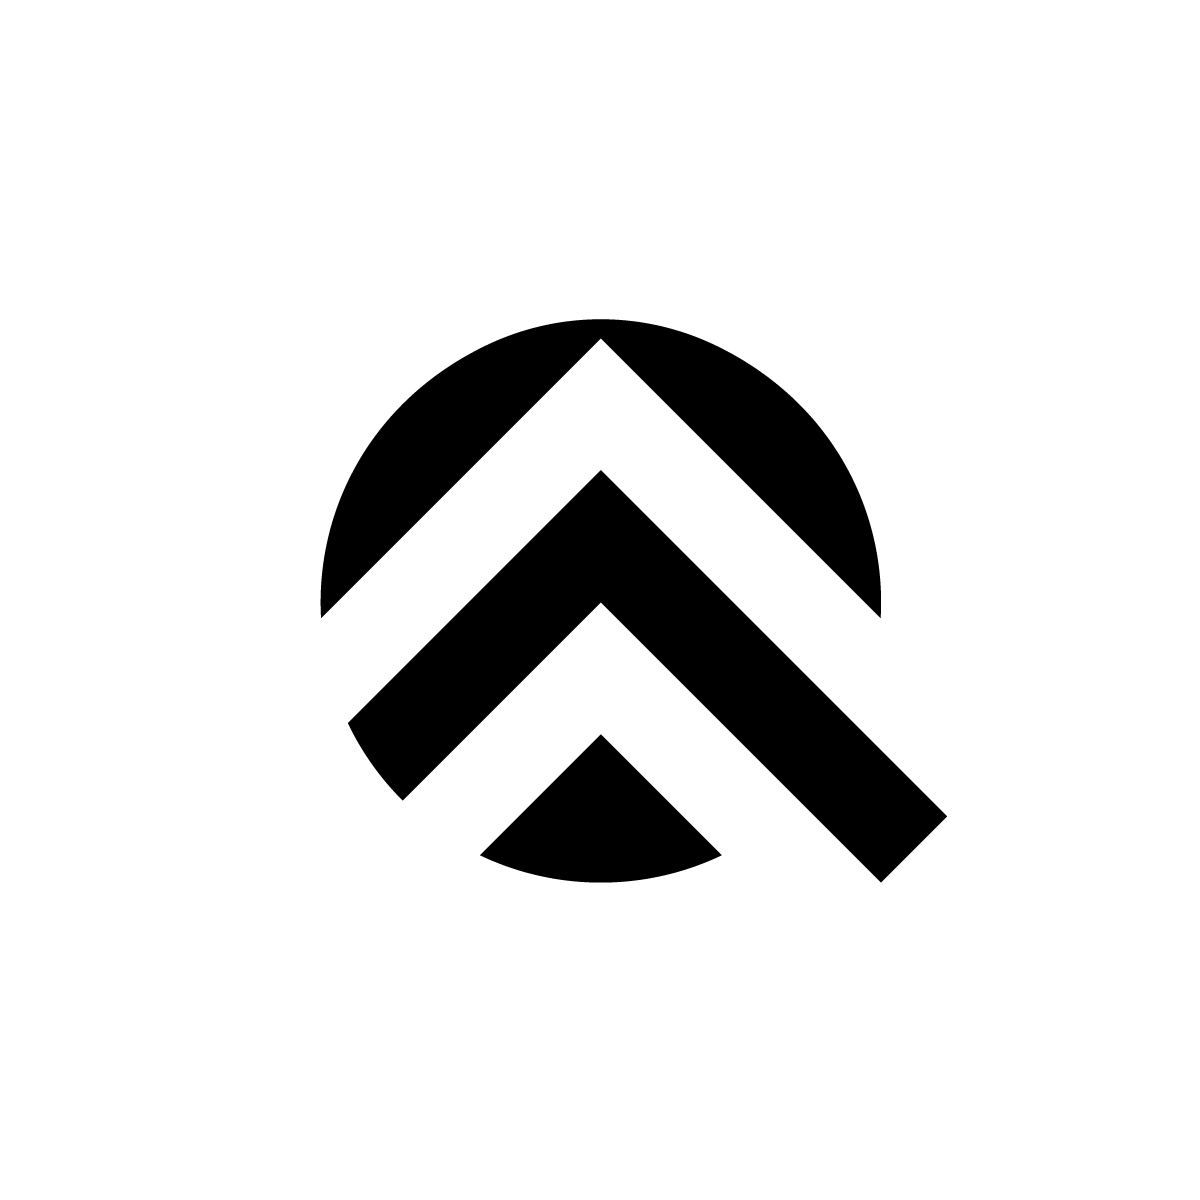 Q Arrows Logo: A letter Q filled with triangle shapes resembling arrowheads